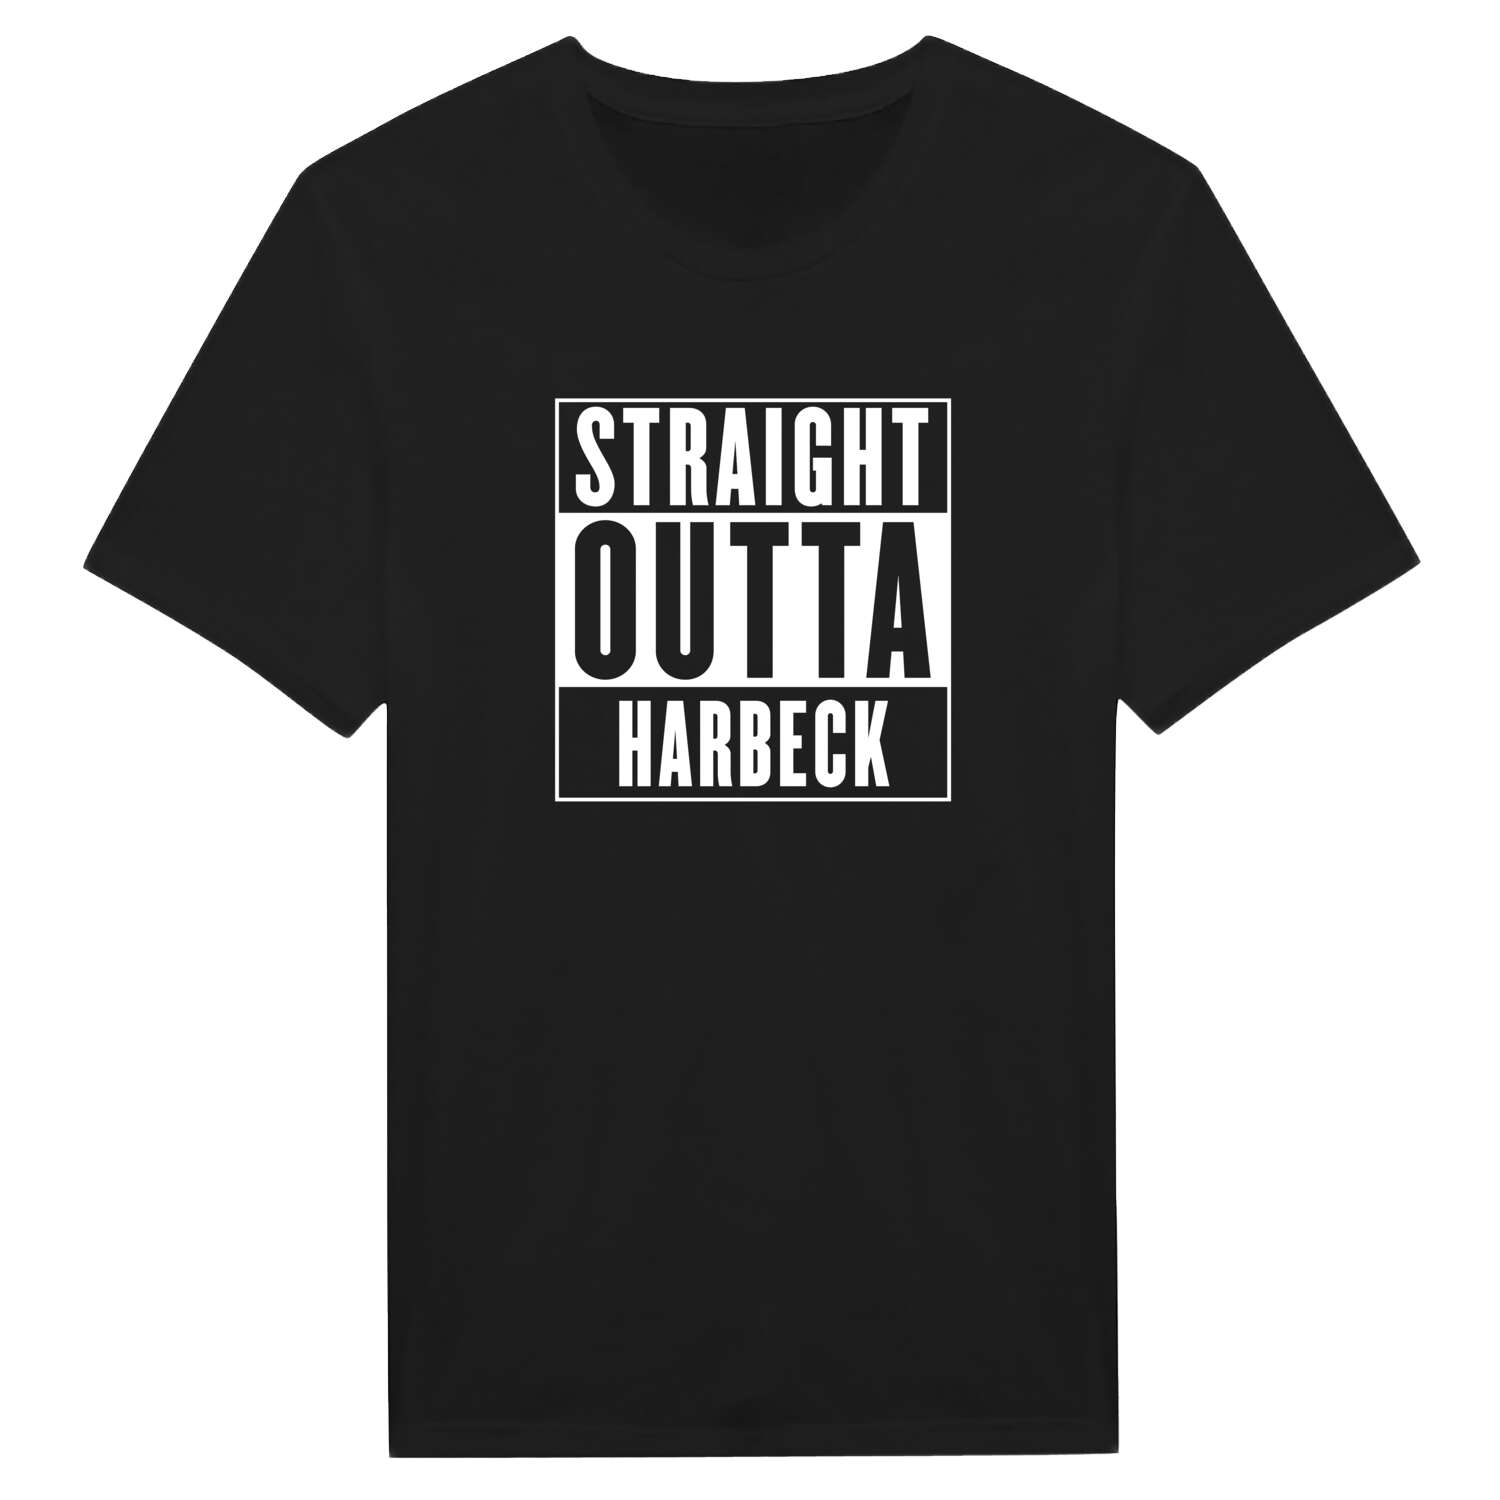 Harbeck T-Shirt »Straight Outta«